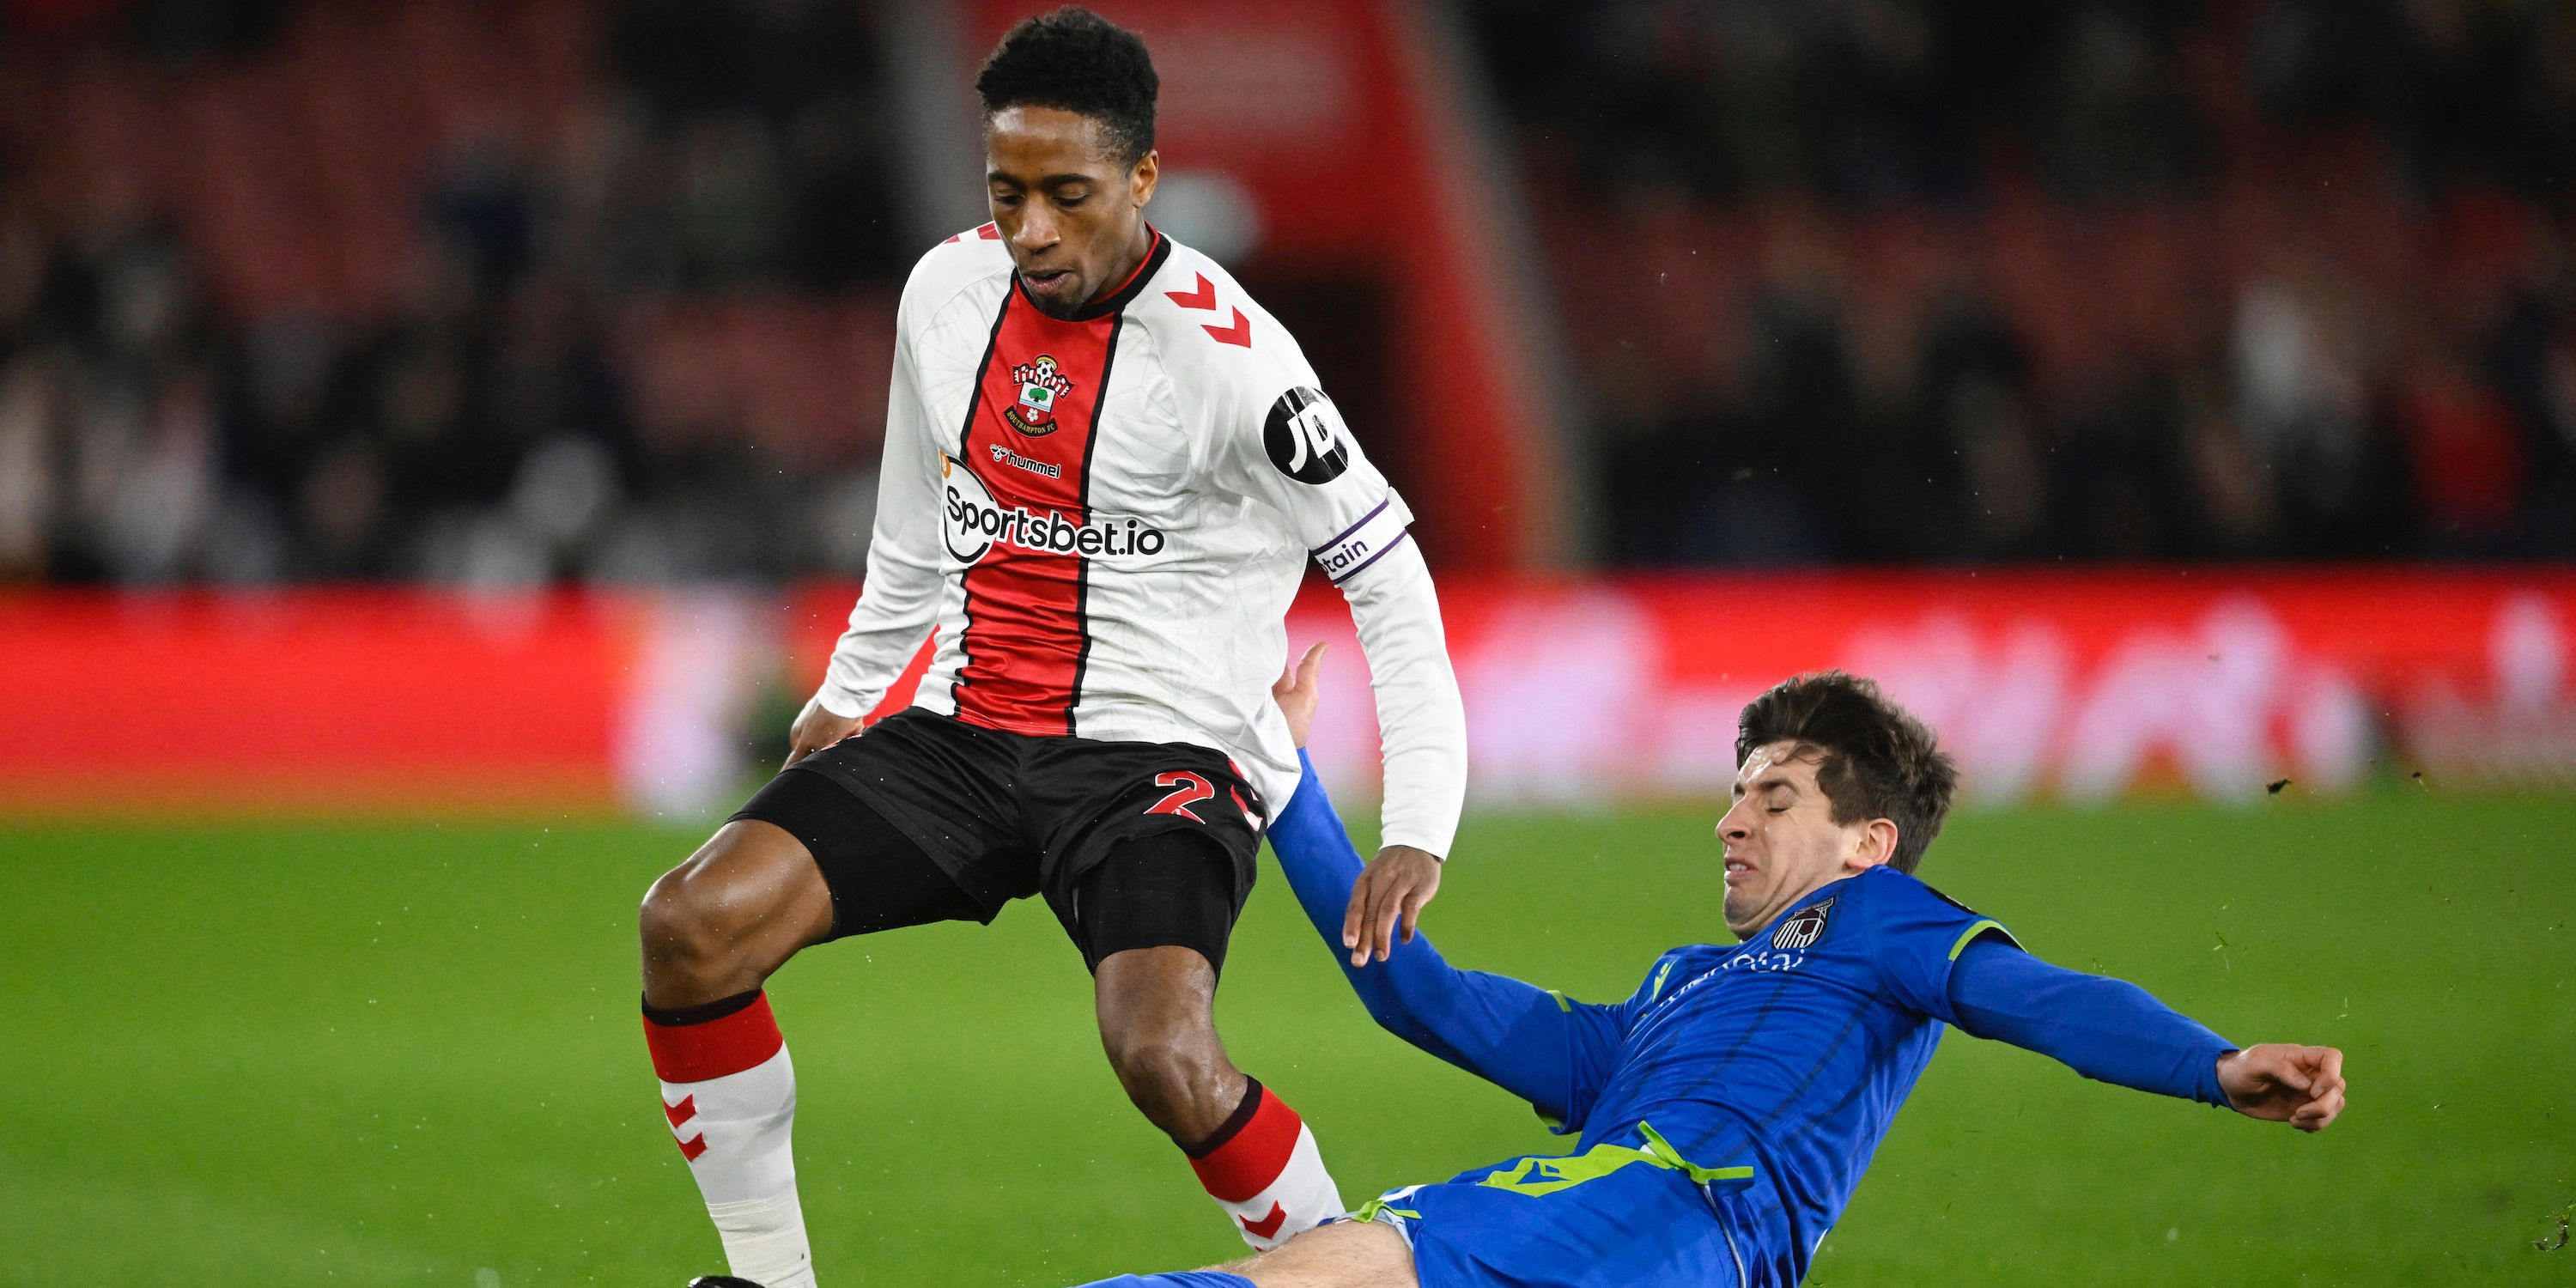 Grimsby Town's Anthony Driscoll-Glennon in action with Southampton's Kyle Walker-Peters